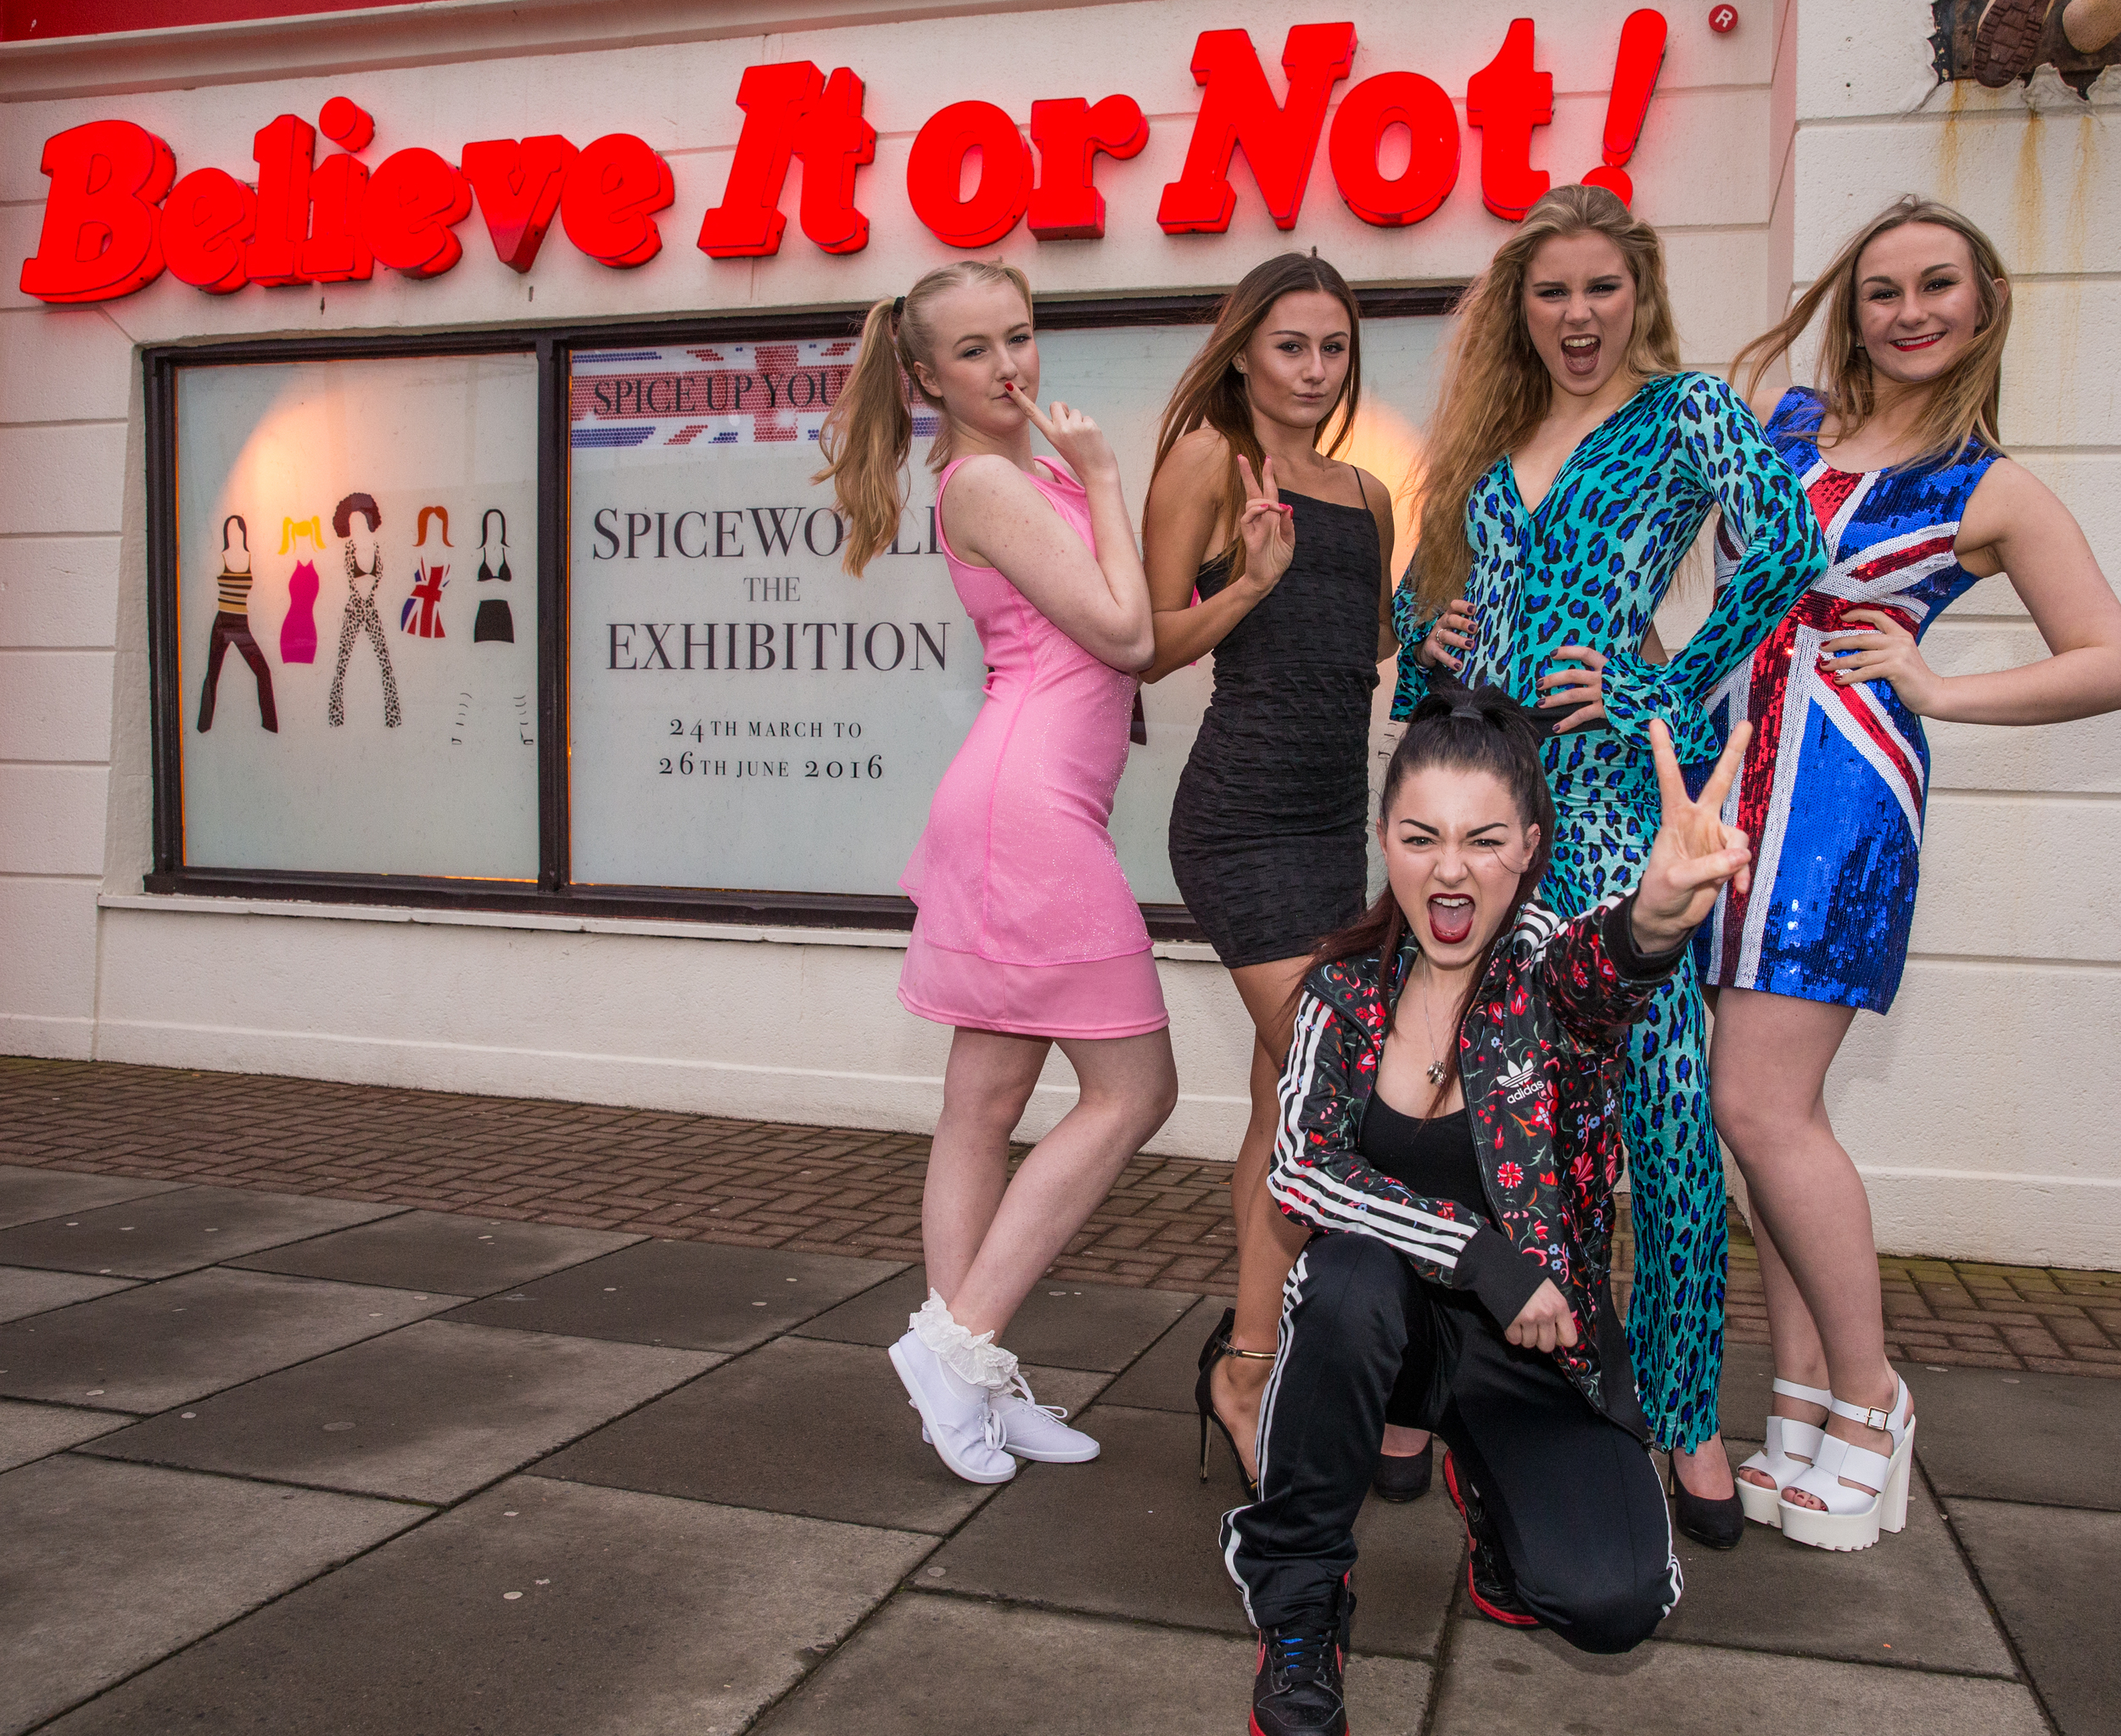 2. Spice Girls Exhibition at Ripley's Blackpool. Photo Credit - Steve Lee, 2016.jpg